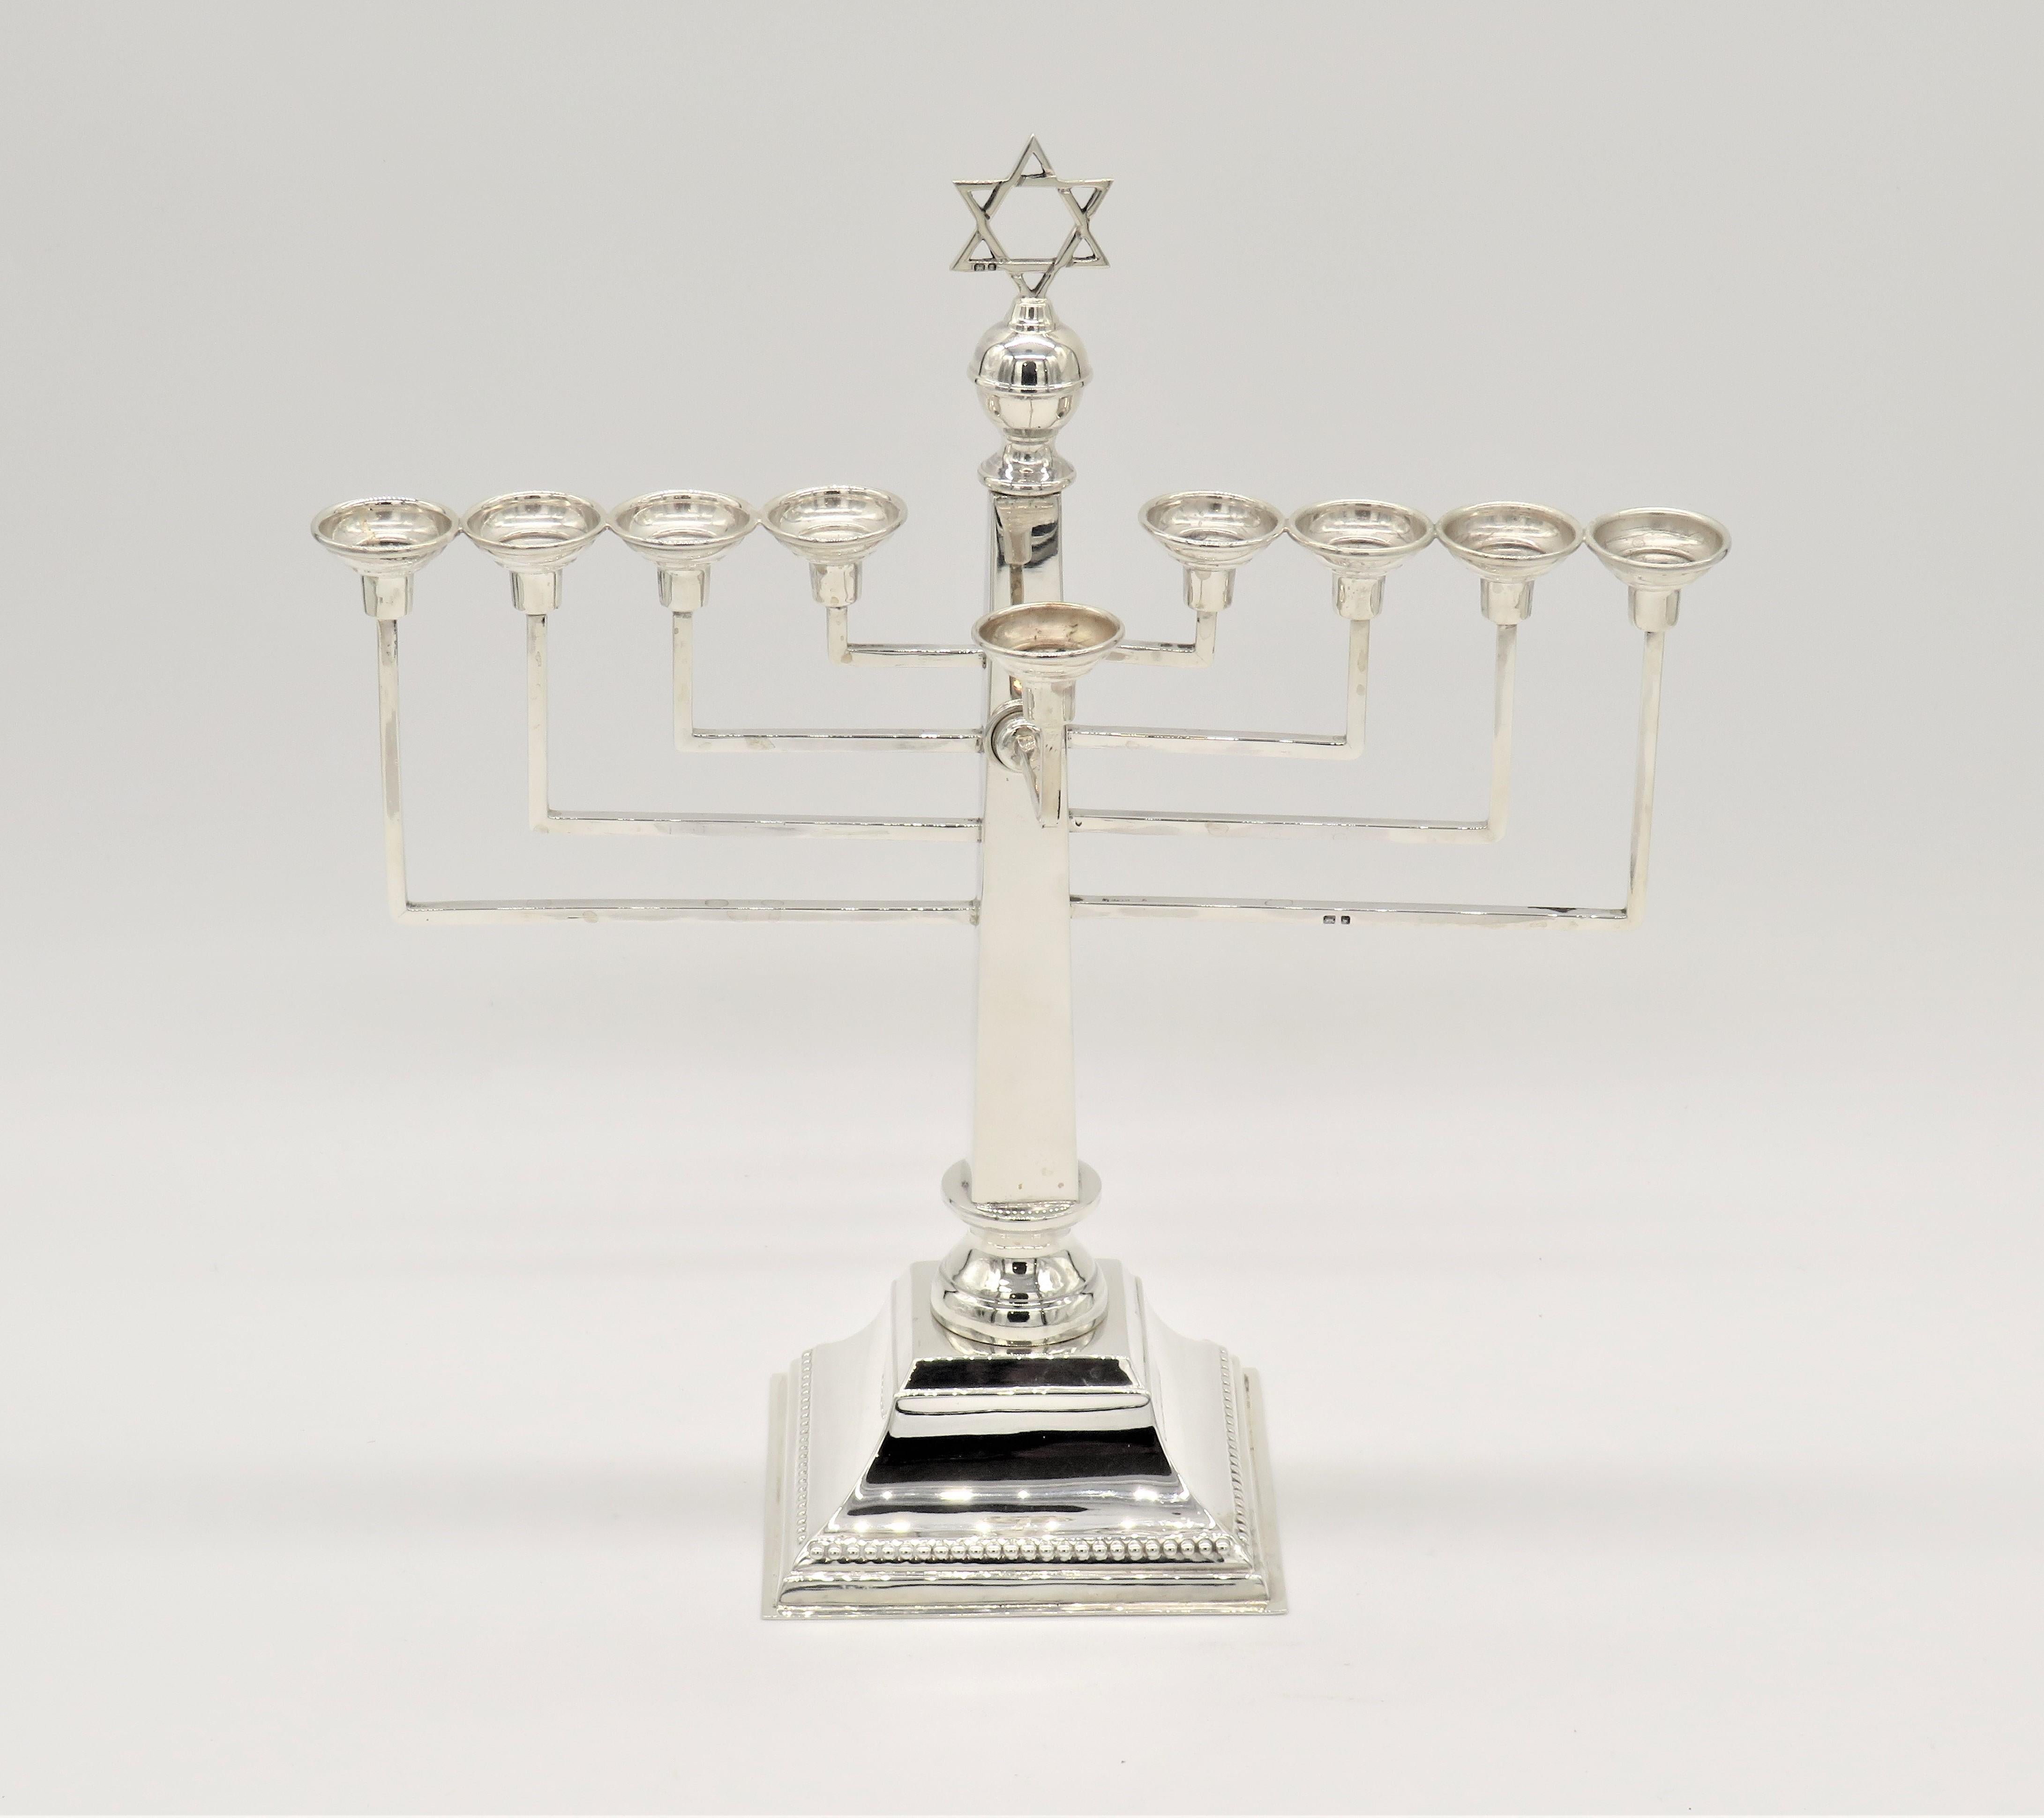 English silver Hanukkah lamp features nine candleholders in traditional style. These round shaped candleholders are supported by tiers of geometric lines. Linear transitions along the surface creates a harmonious visual appearance. In the center